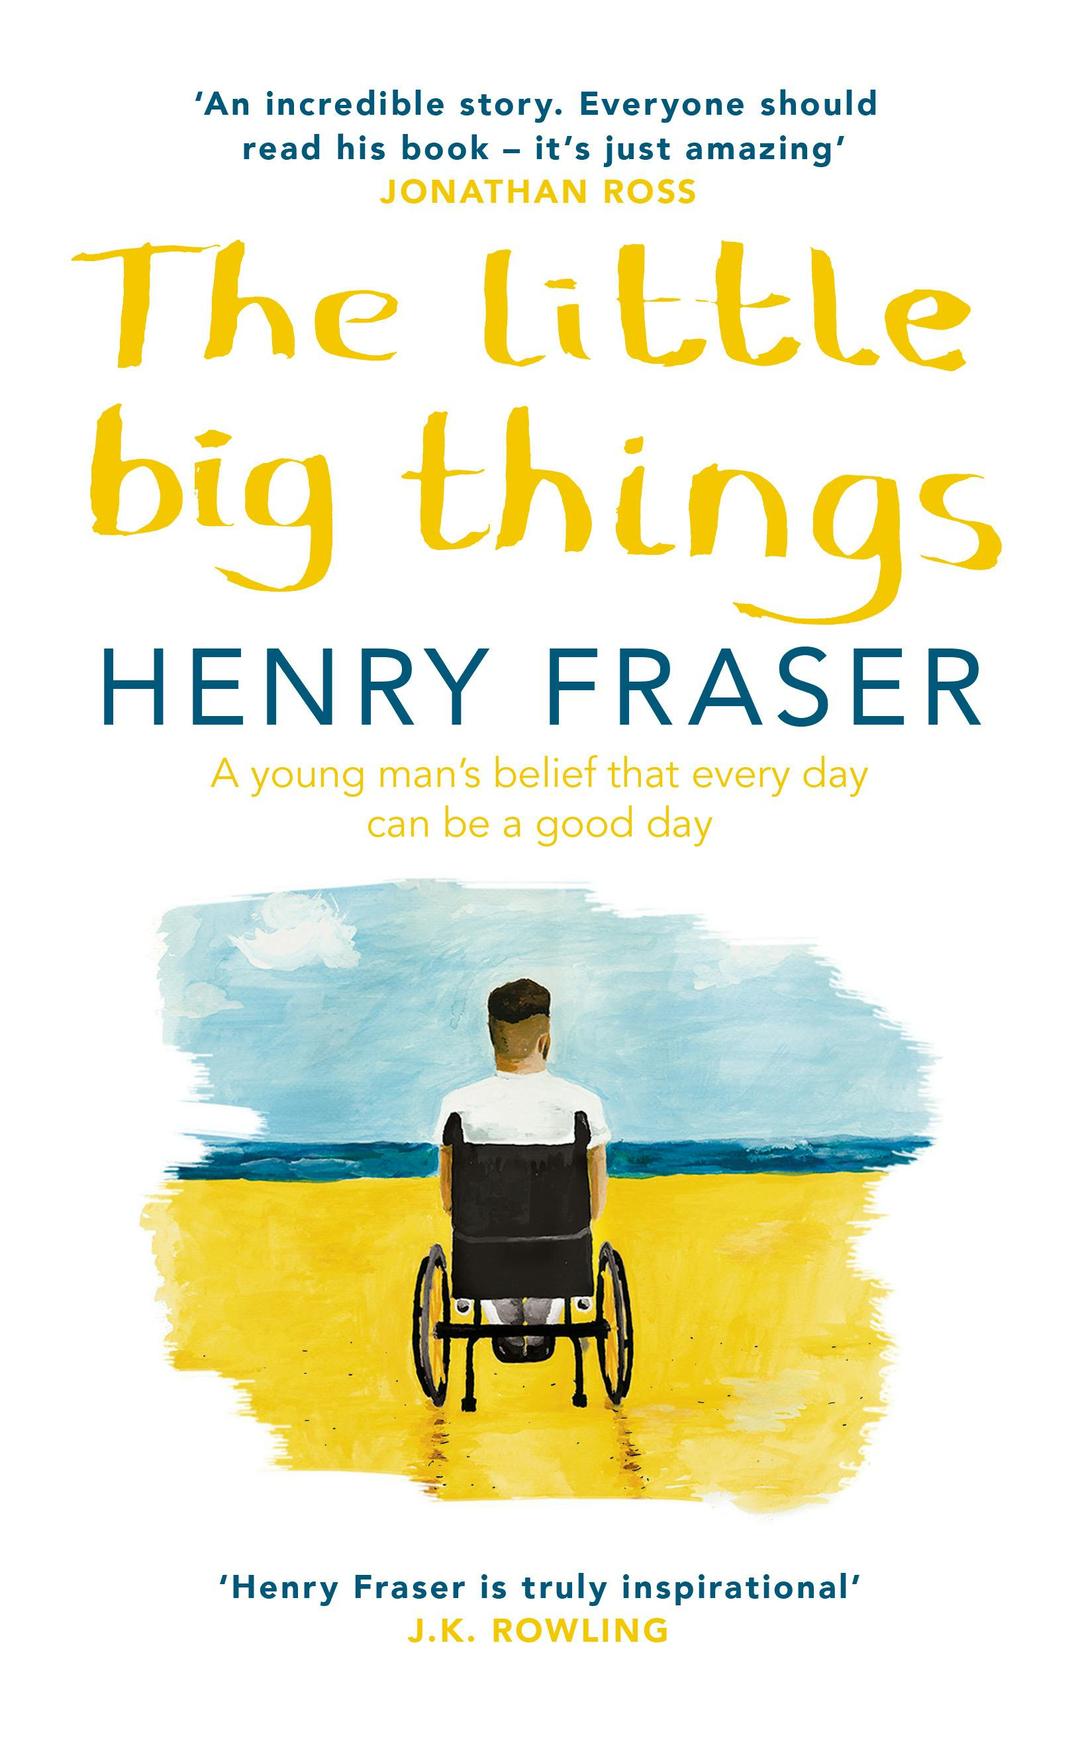 The Little Big Things: A Young Man's Belief That Every Day Can Be a Good Day, by Henry Fraser